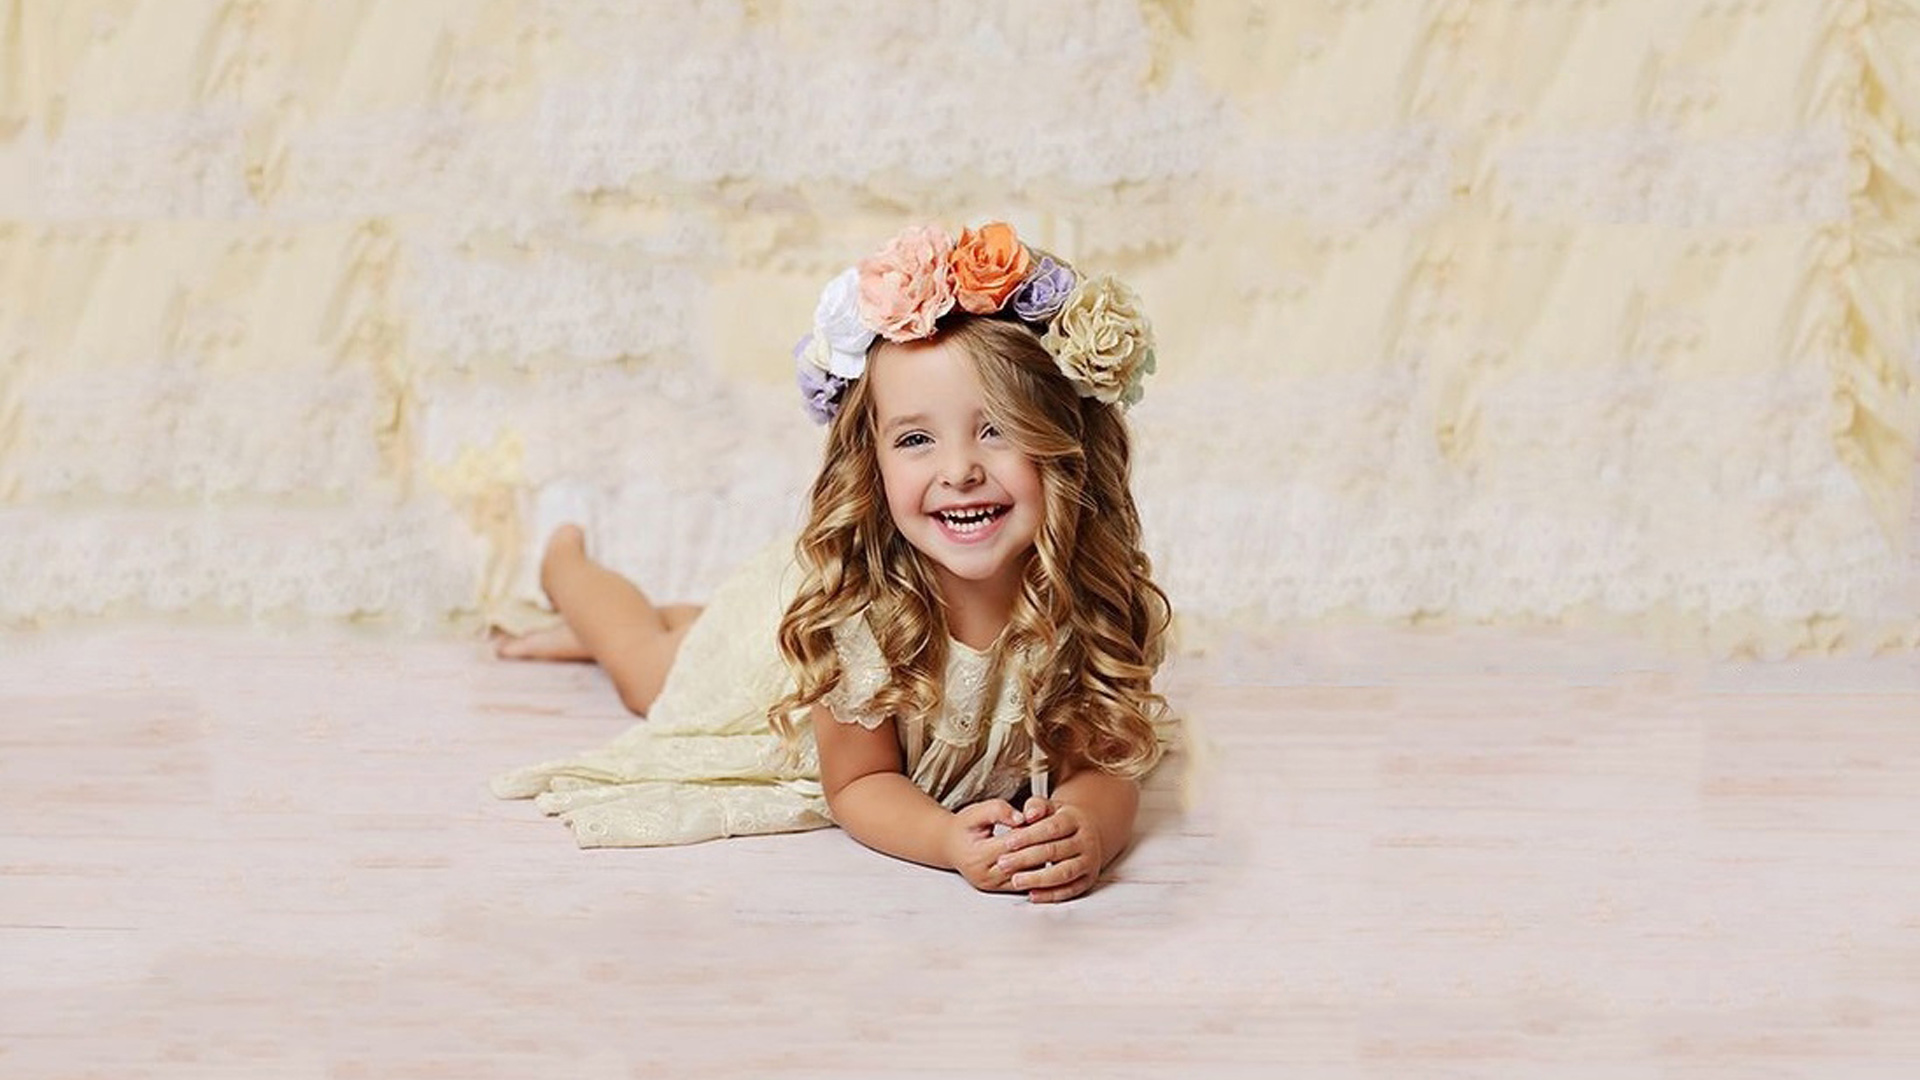 Smiling Curly Hair Cute Little Girl Is Lying Down On Floor Wearing Light Yellow Dress And Wreath 2K Cute